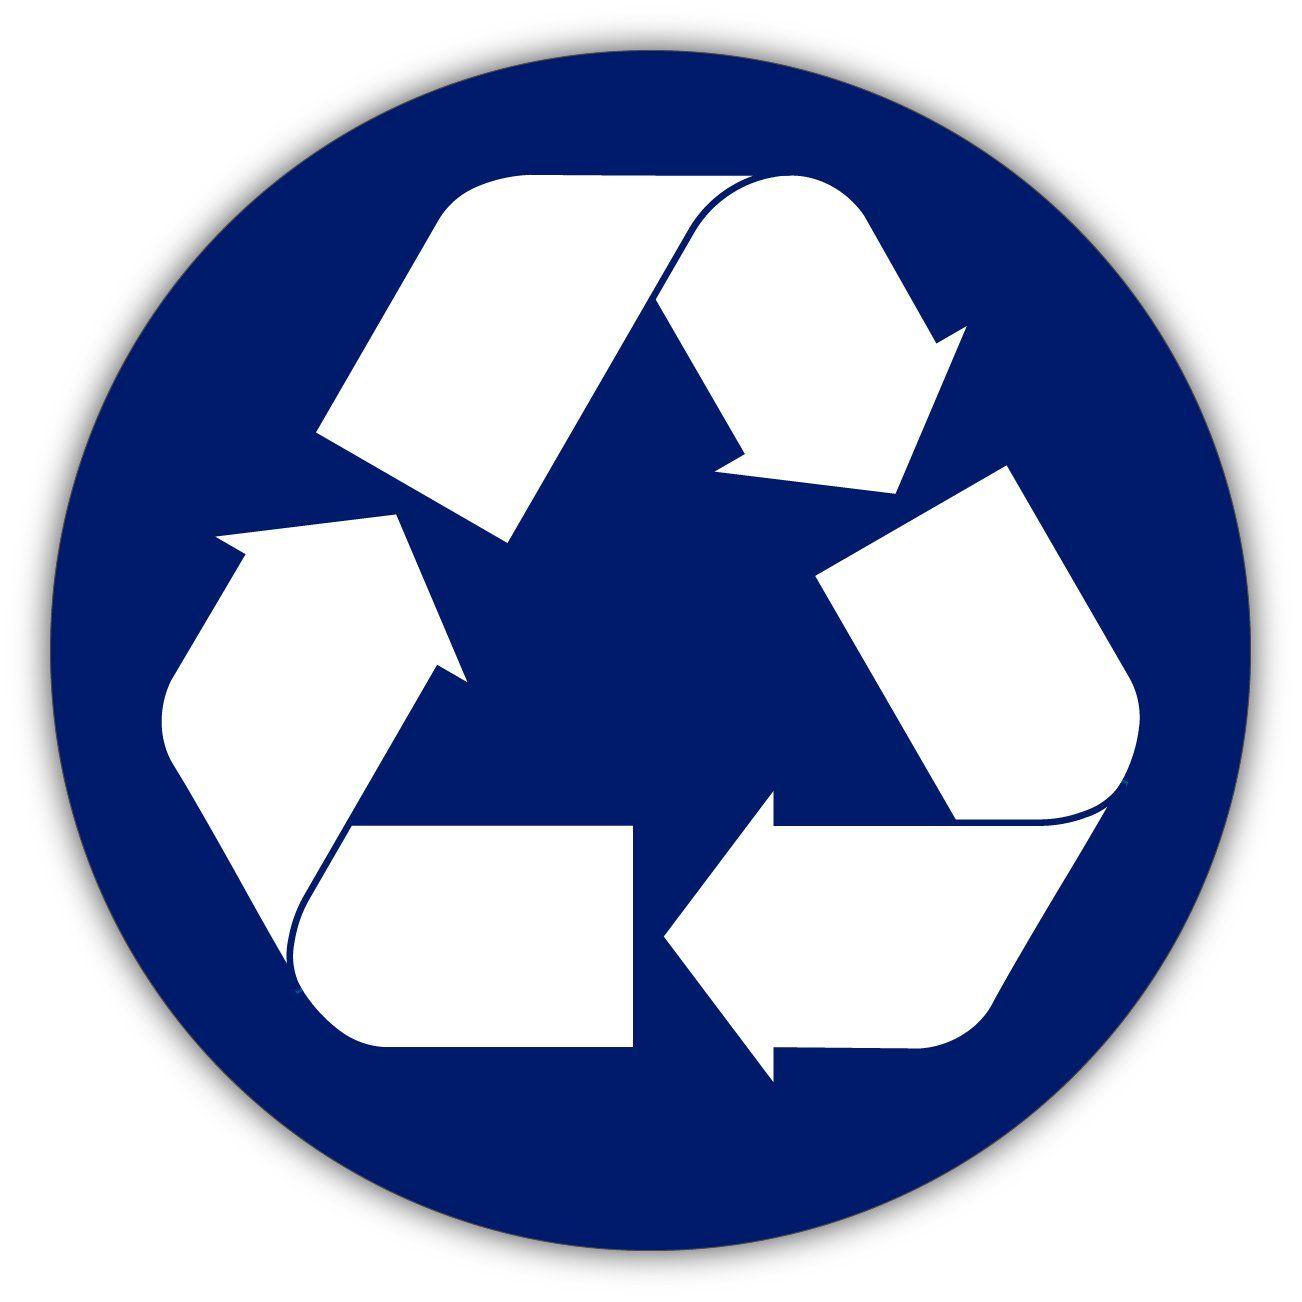 Blue Recycle Logo - Recycling Recycle Bin Symbol Blue Recycle Sign Sticker Decal 4x4 ...